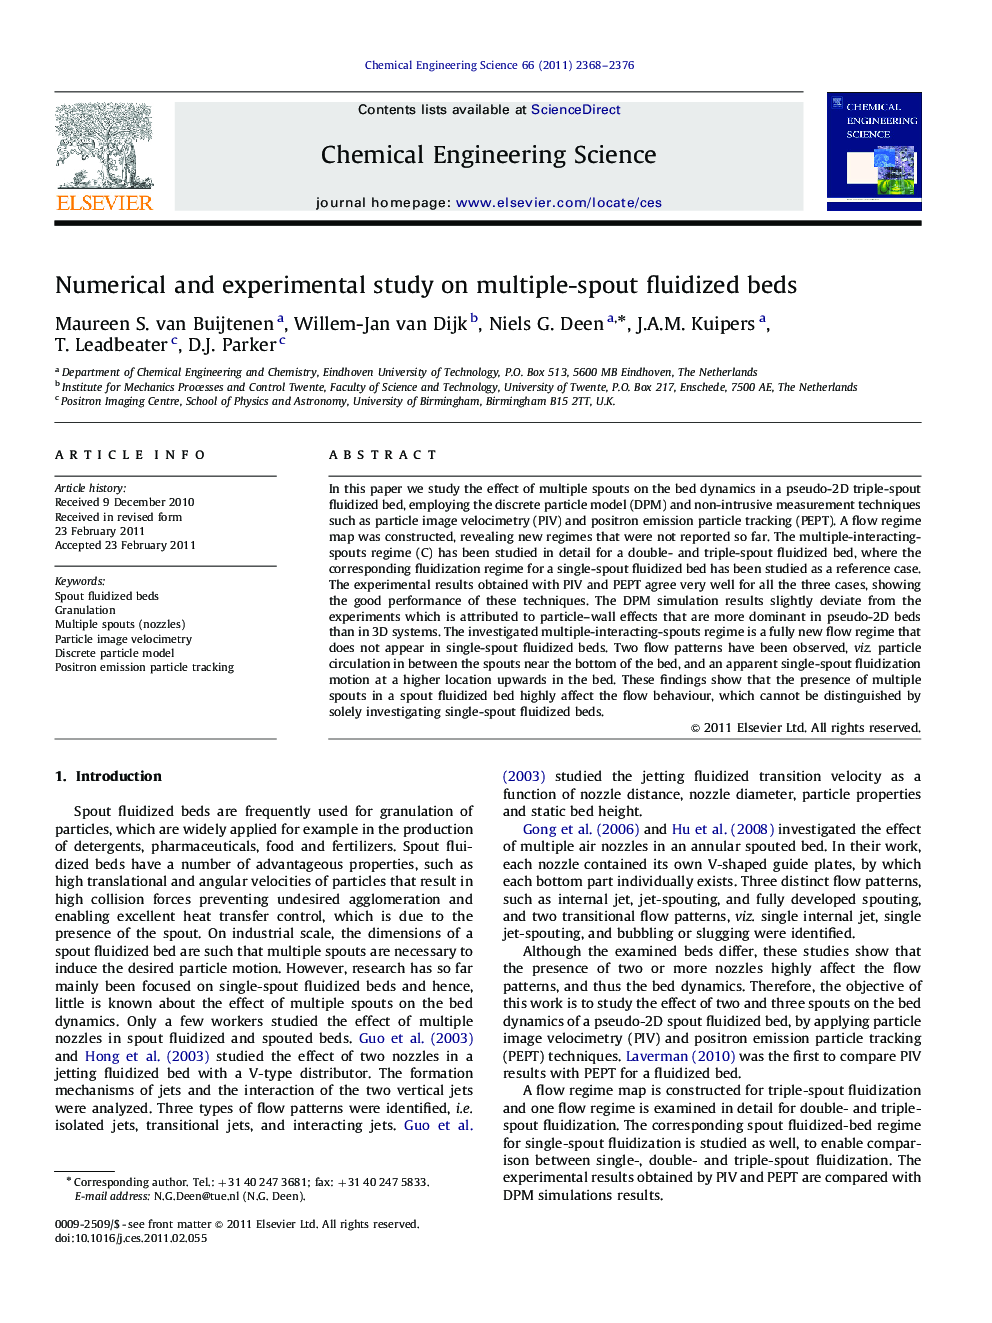 Numerical and experimental study on multiple-spout fluidized beds